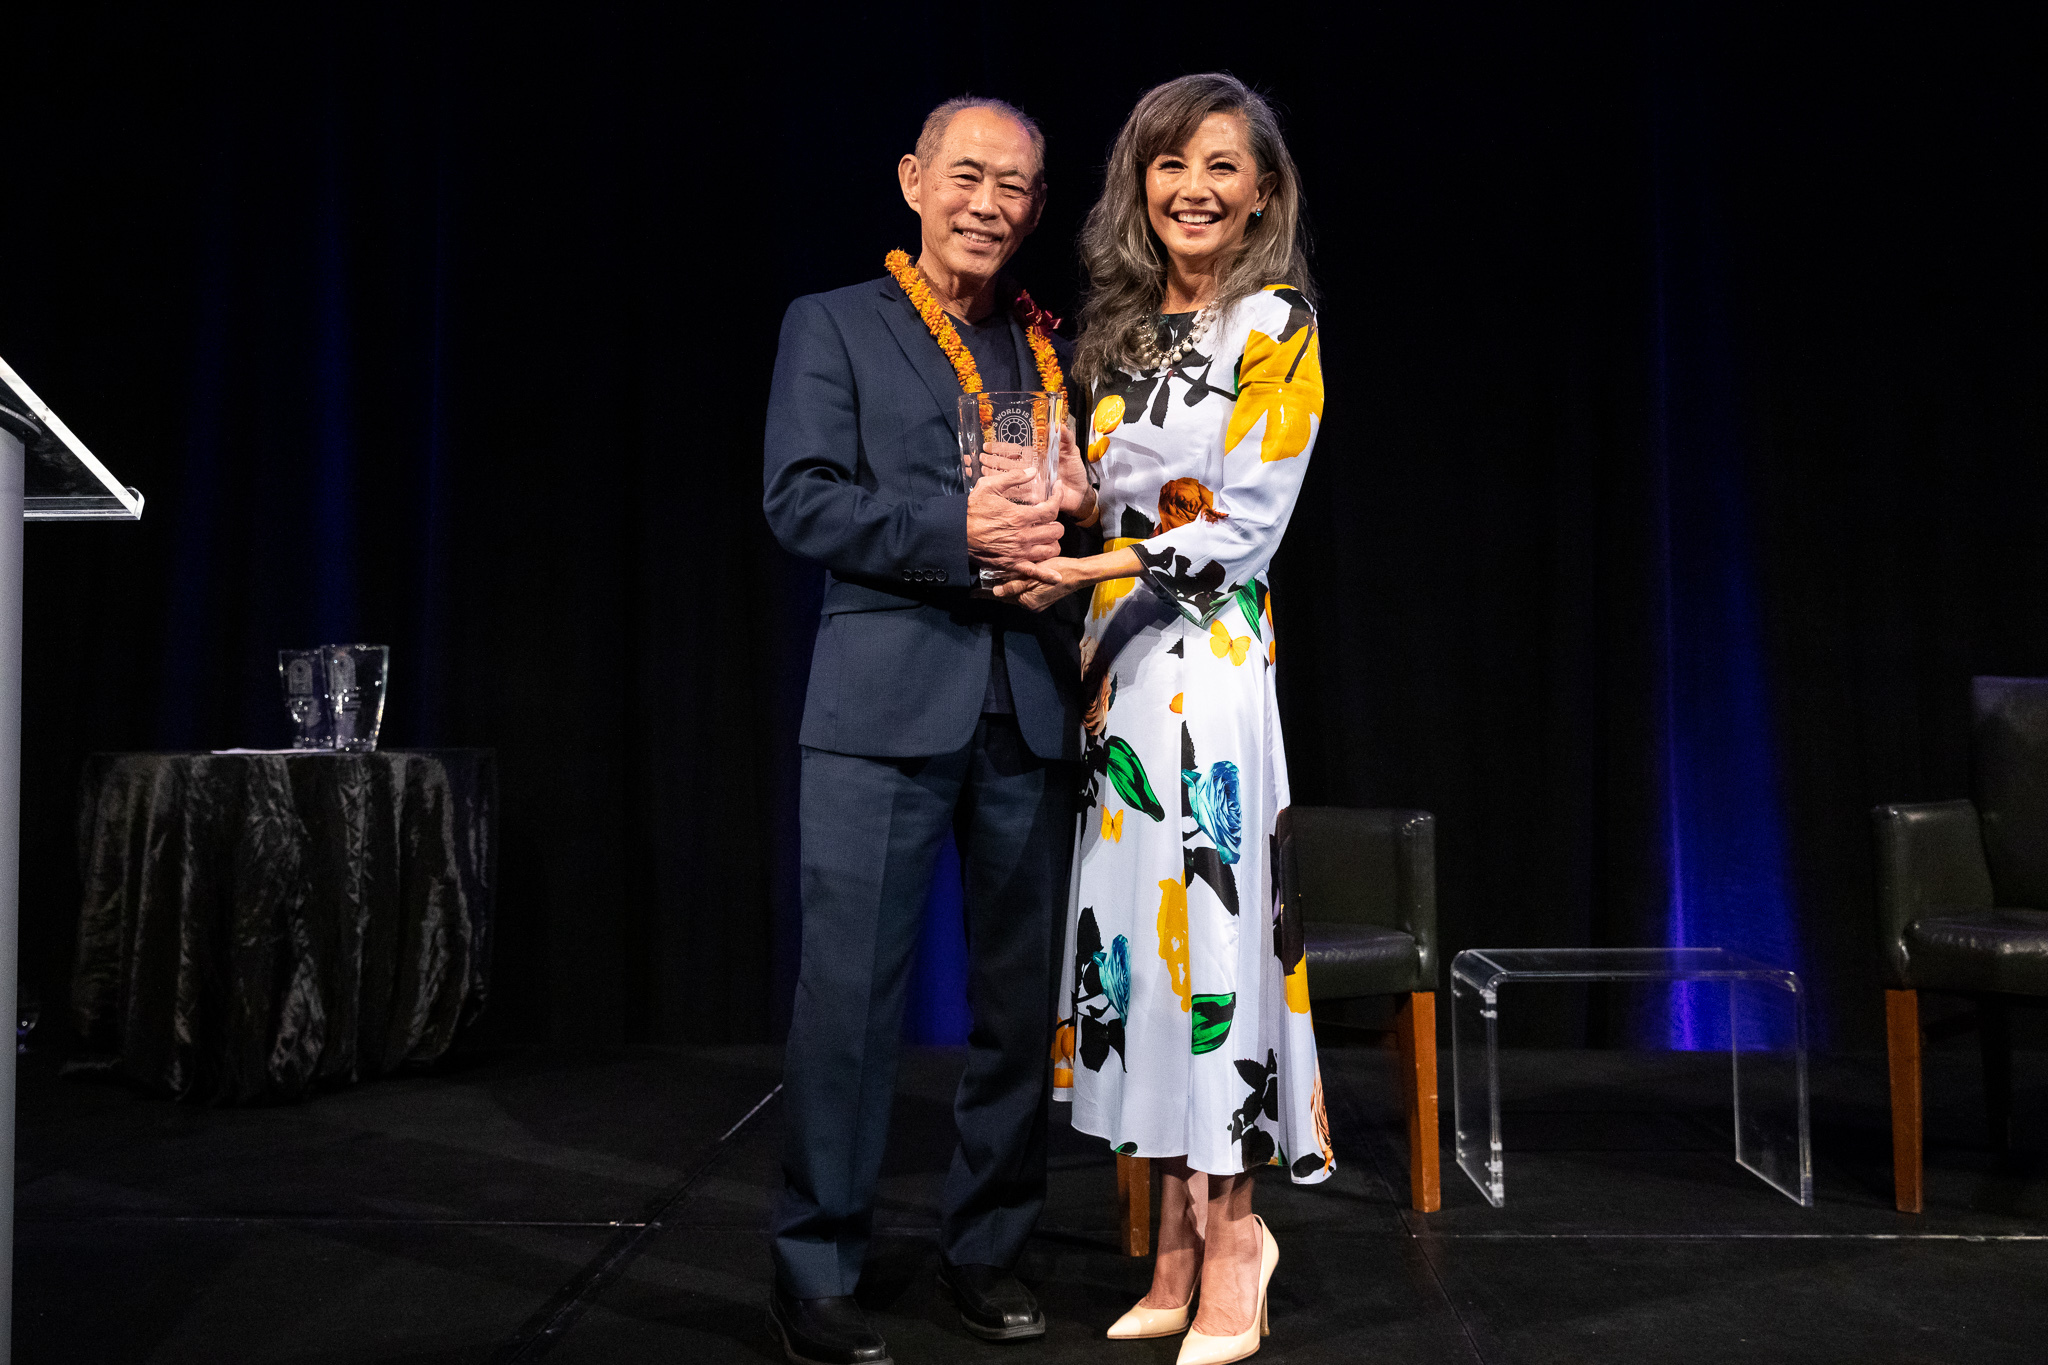 Co-Founder Dale Minami in blue suit holds award presented by Tamlyn Tomita, wearing a white and yellow dress.